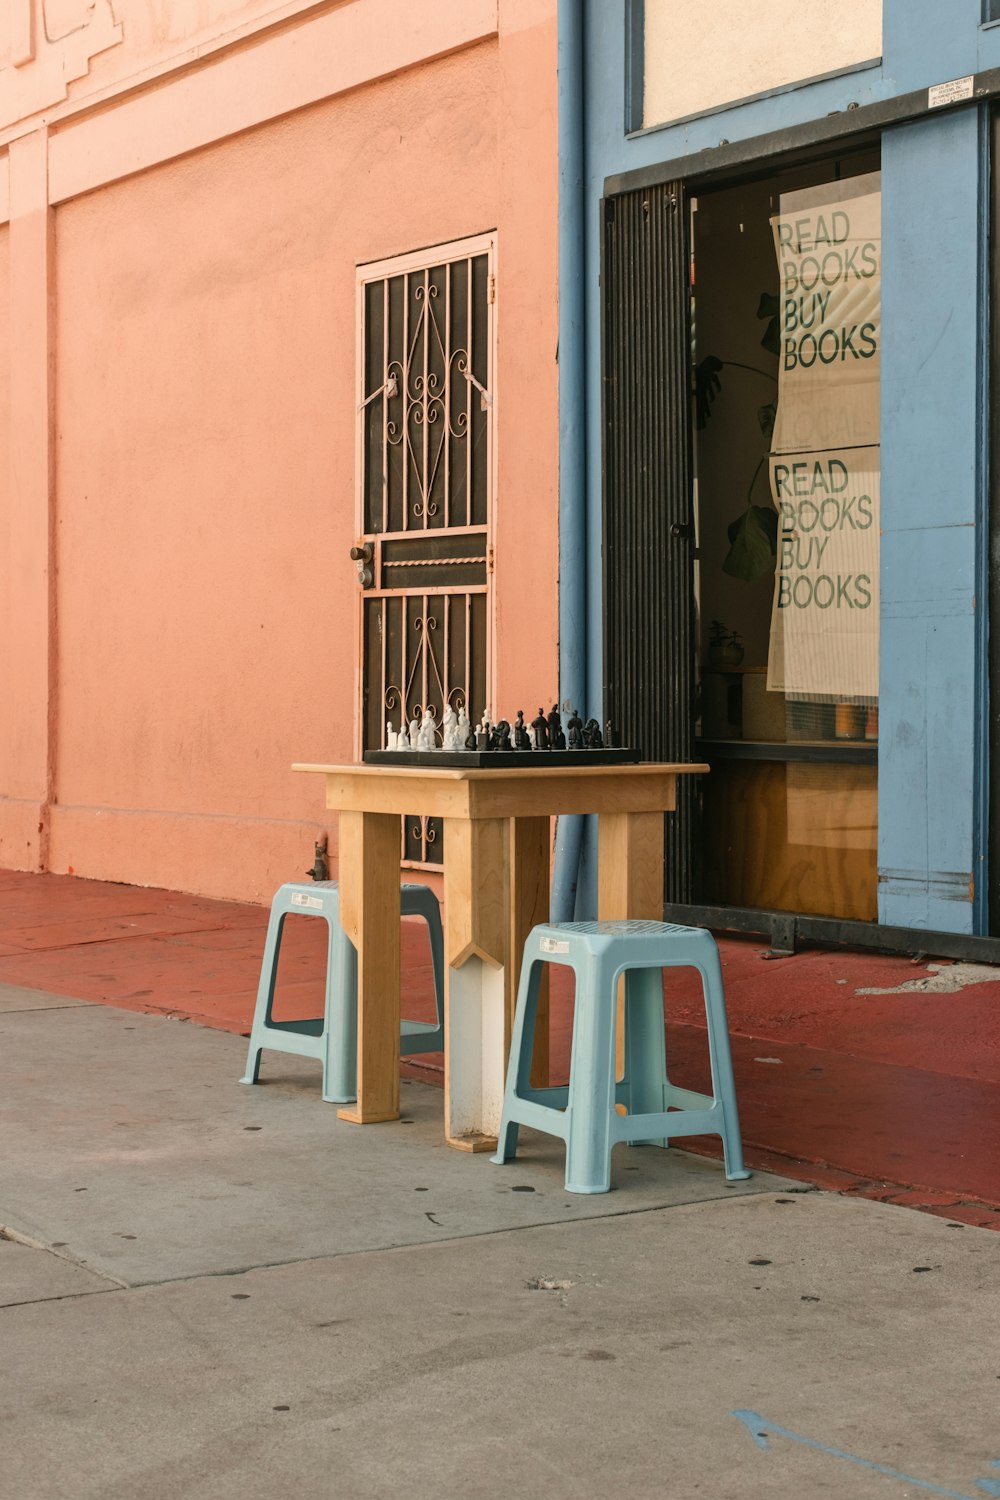 a table and chairs outside a building